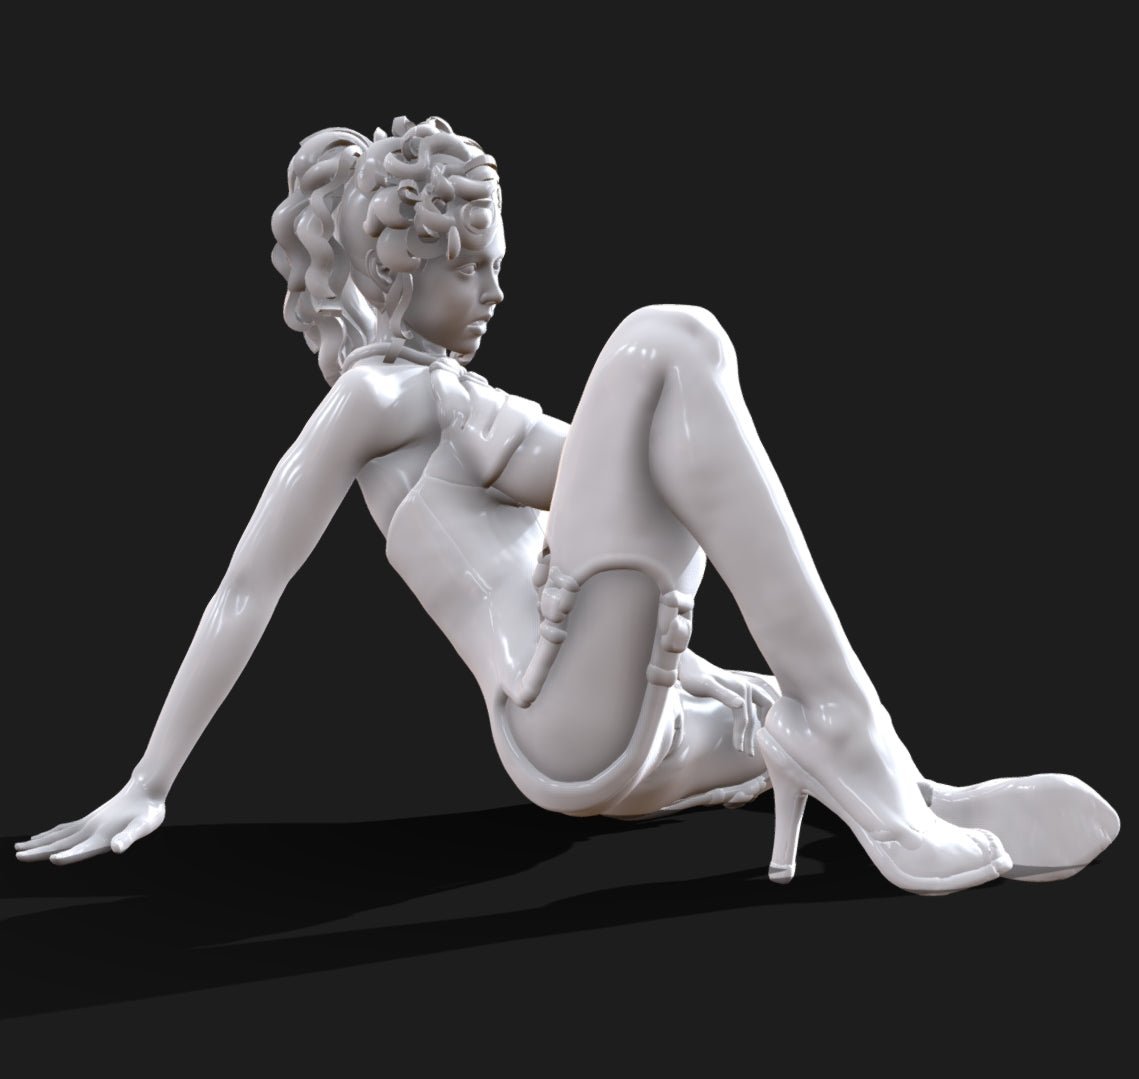 Lola 2 | 3D Printed | Fanart NSFW Figurine Miniature by Altair3D